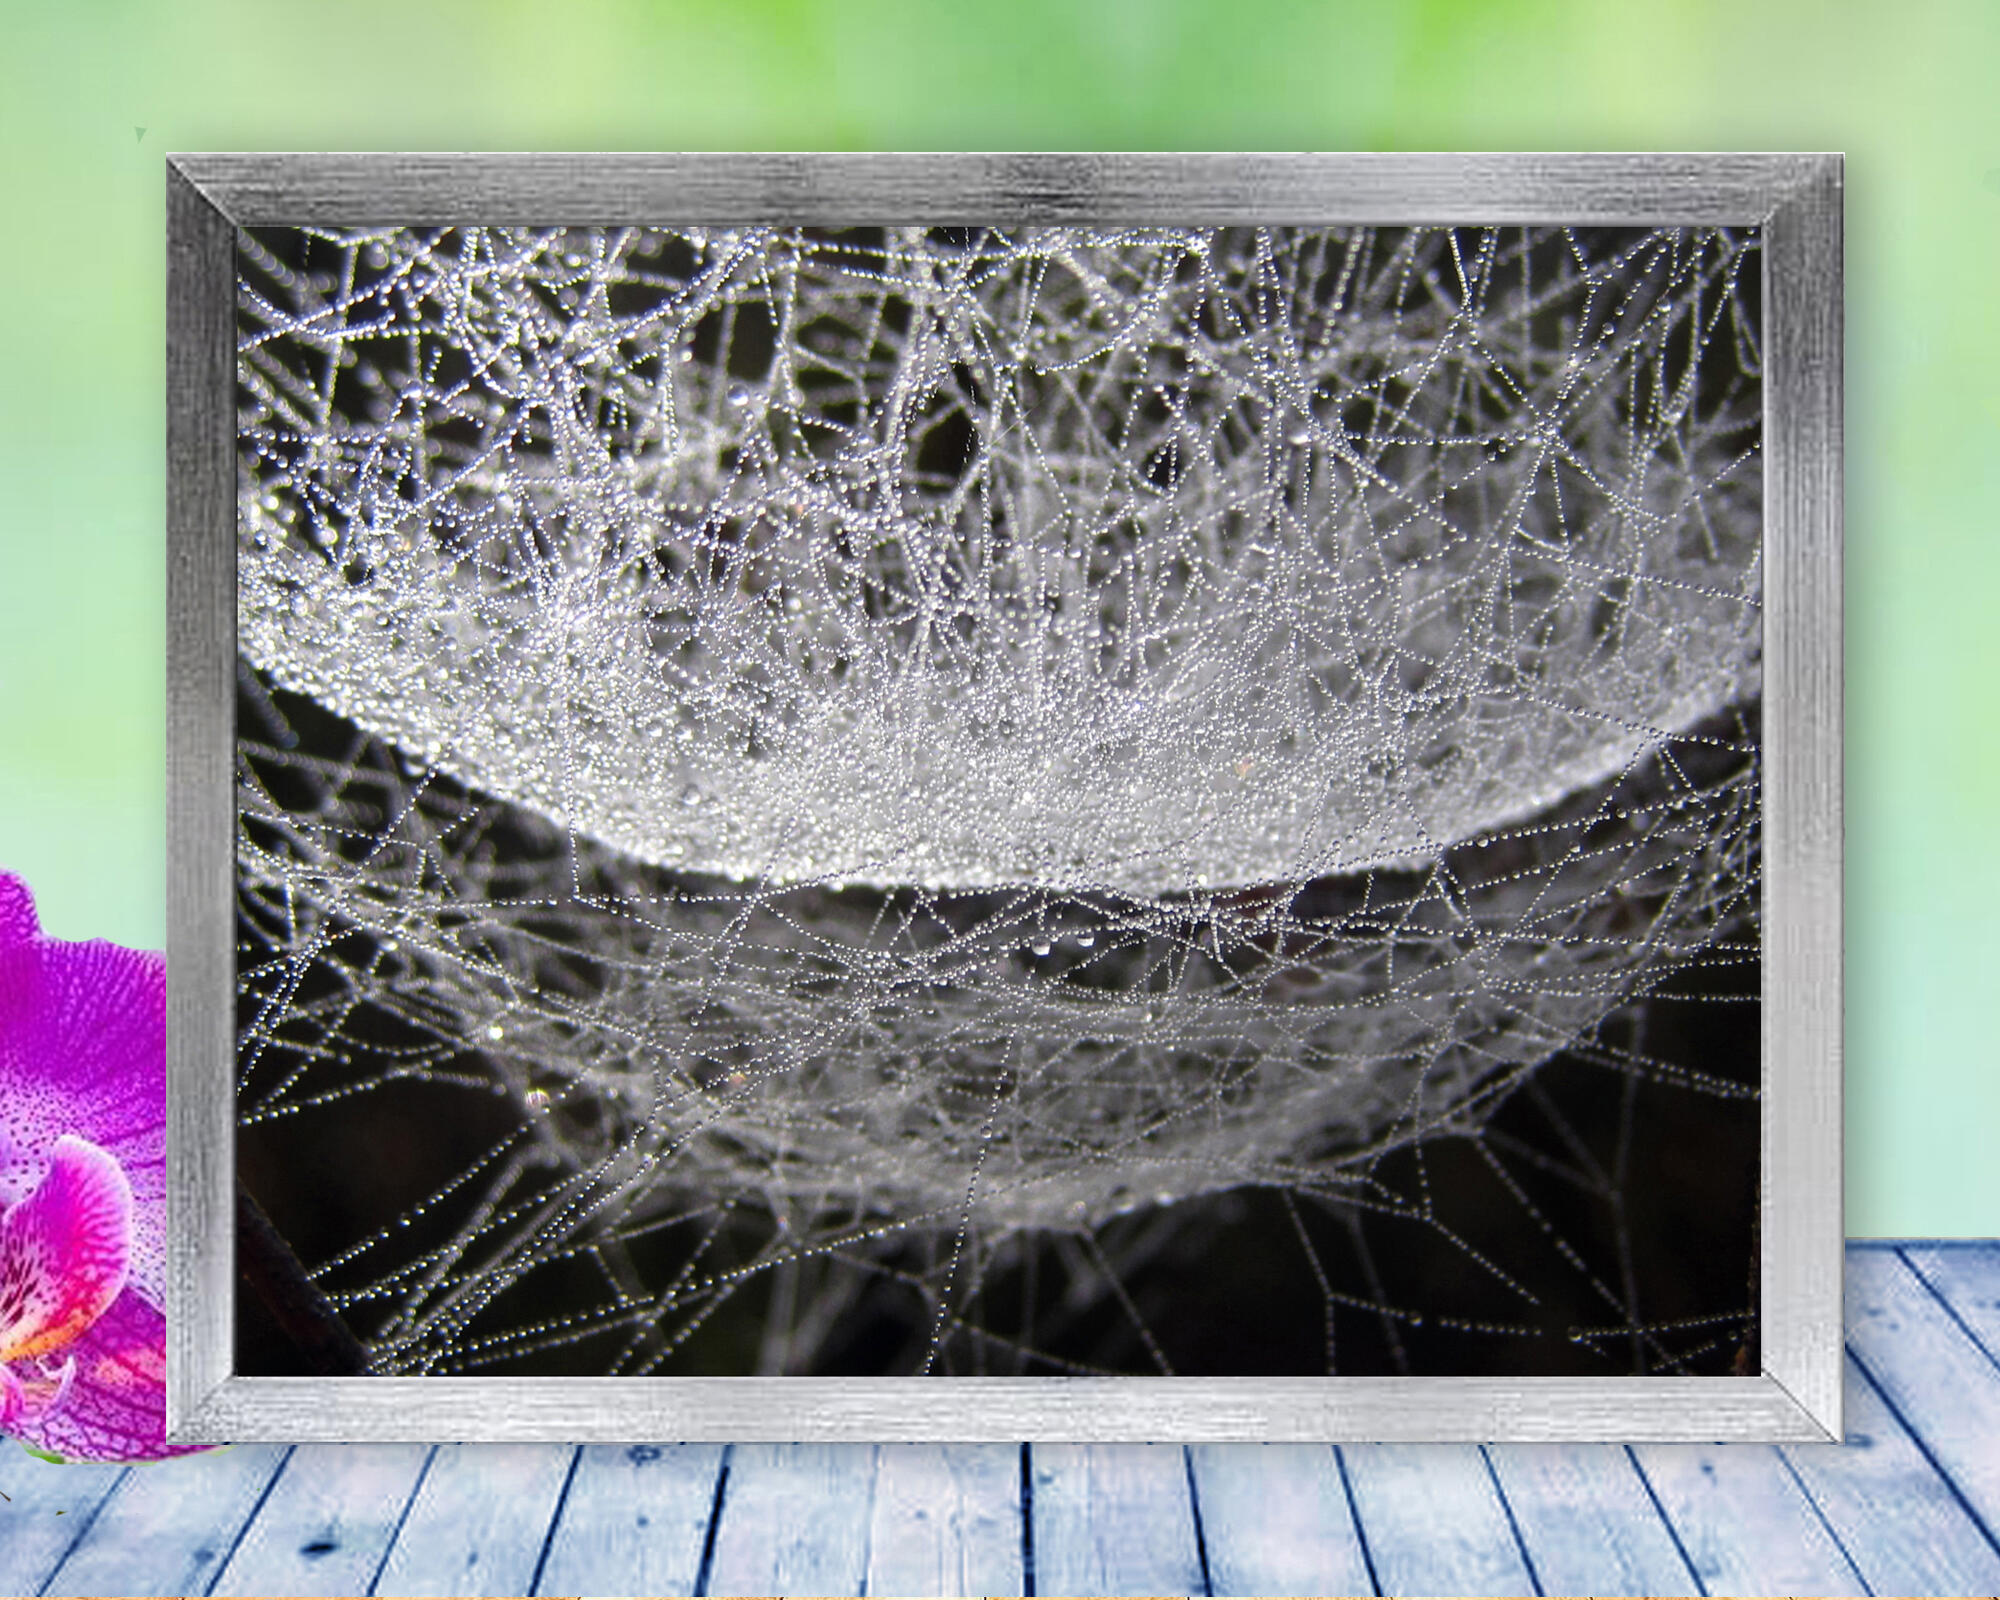 A dew covered spider web becomes a water hammock in this soothing, peaceful nature photo with Poem - Spider Hammock by The Poetry of Nature